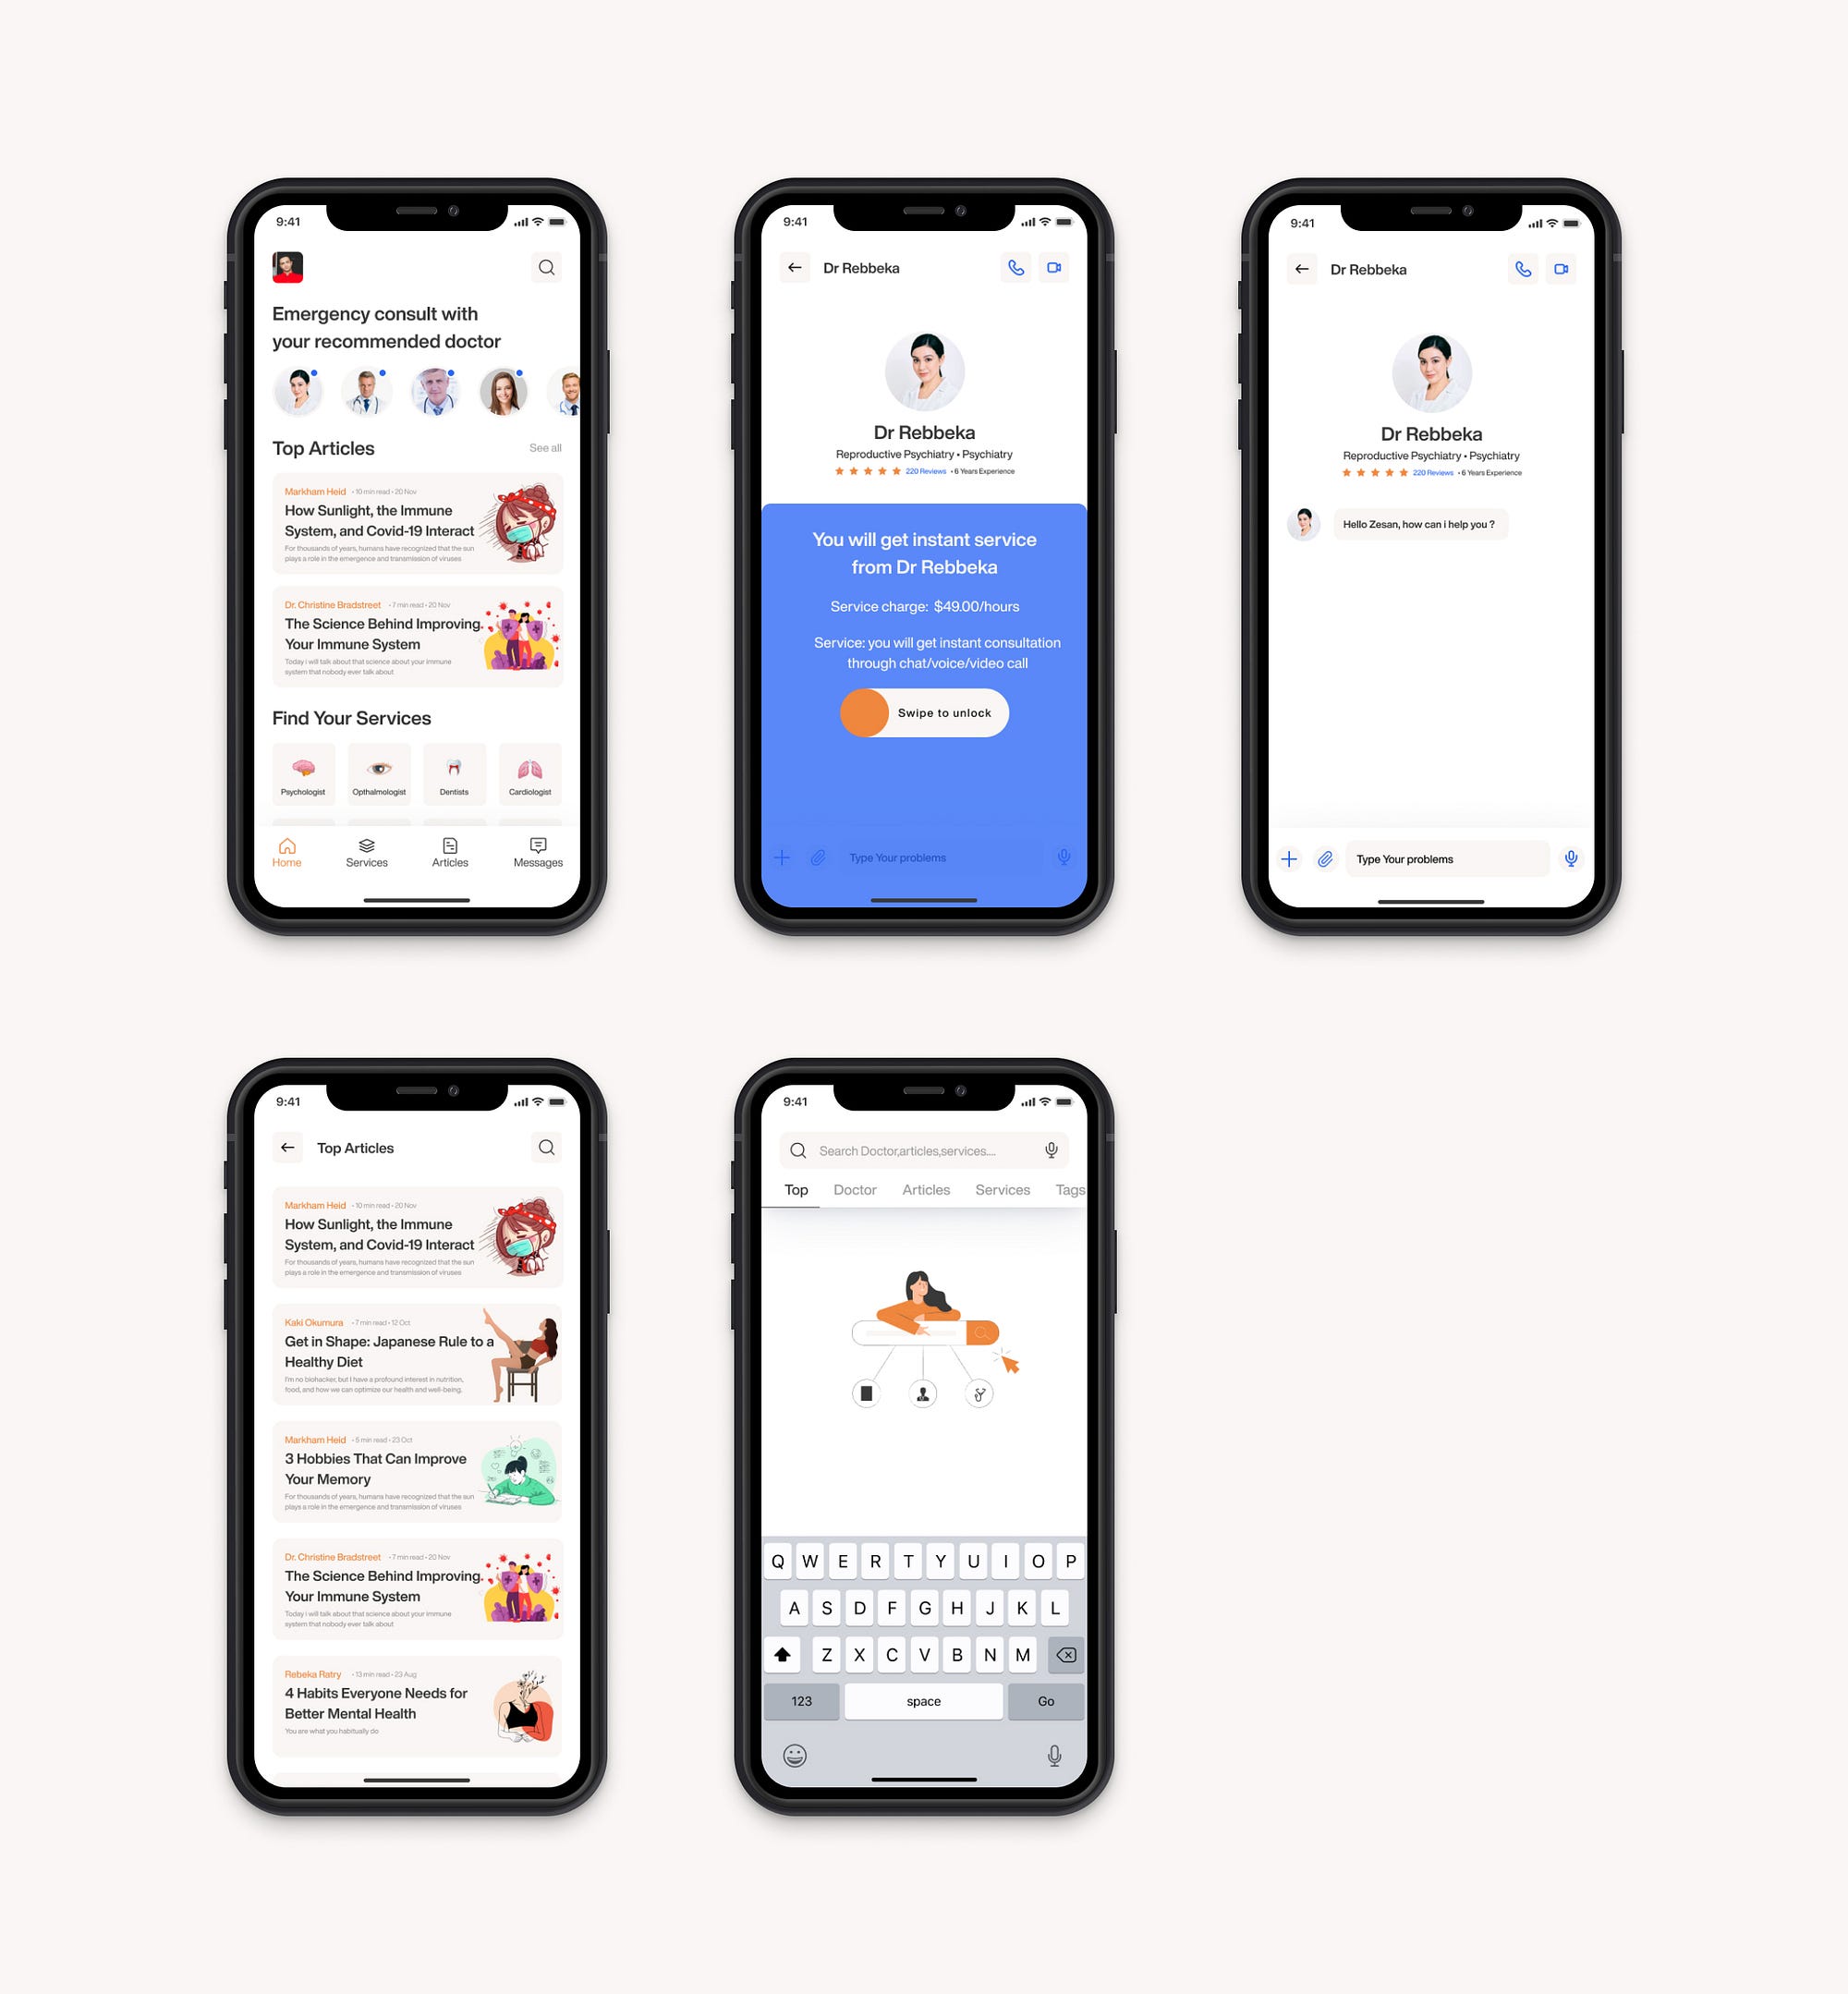 Personal Doctor - Mobile App by Arounda on Dribbble